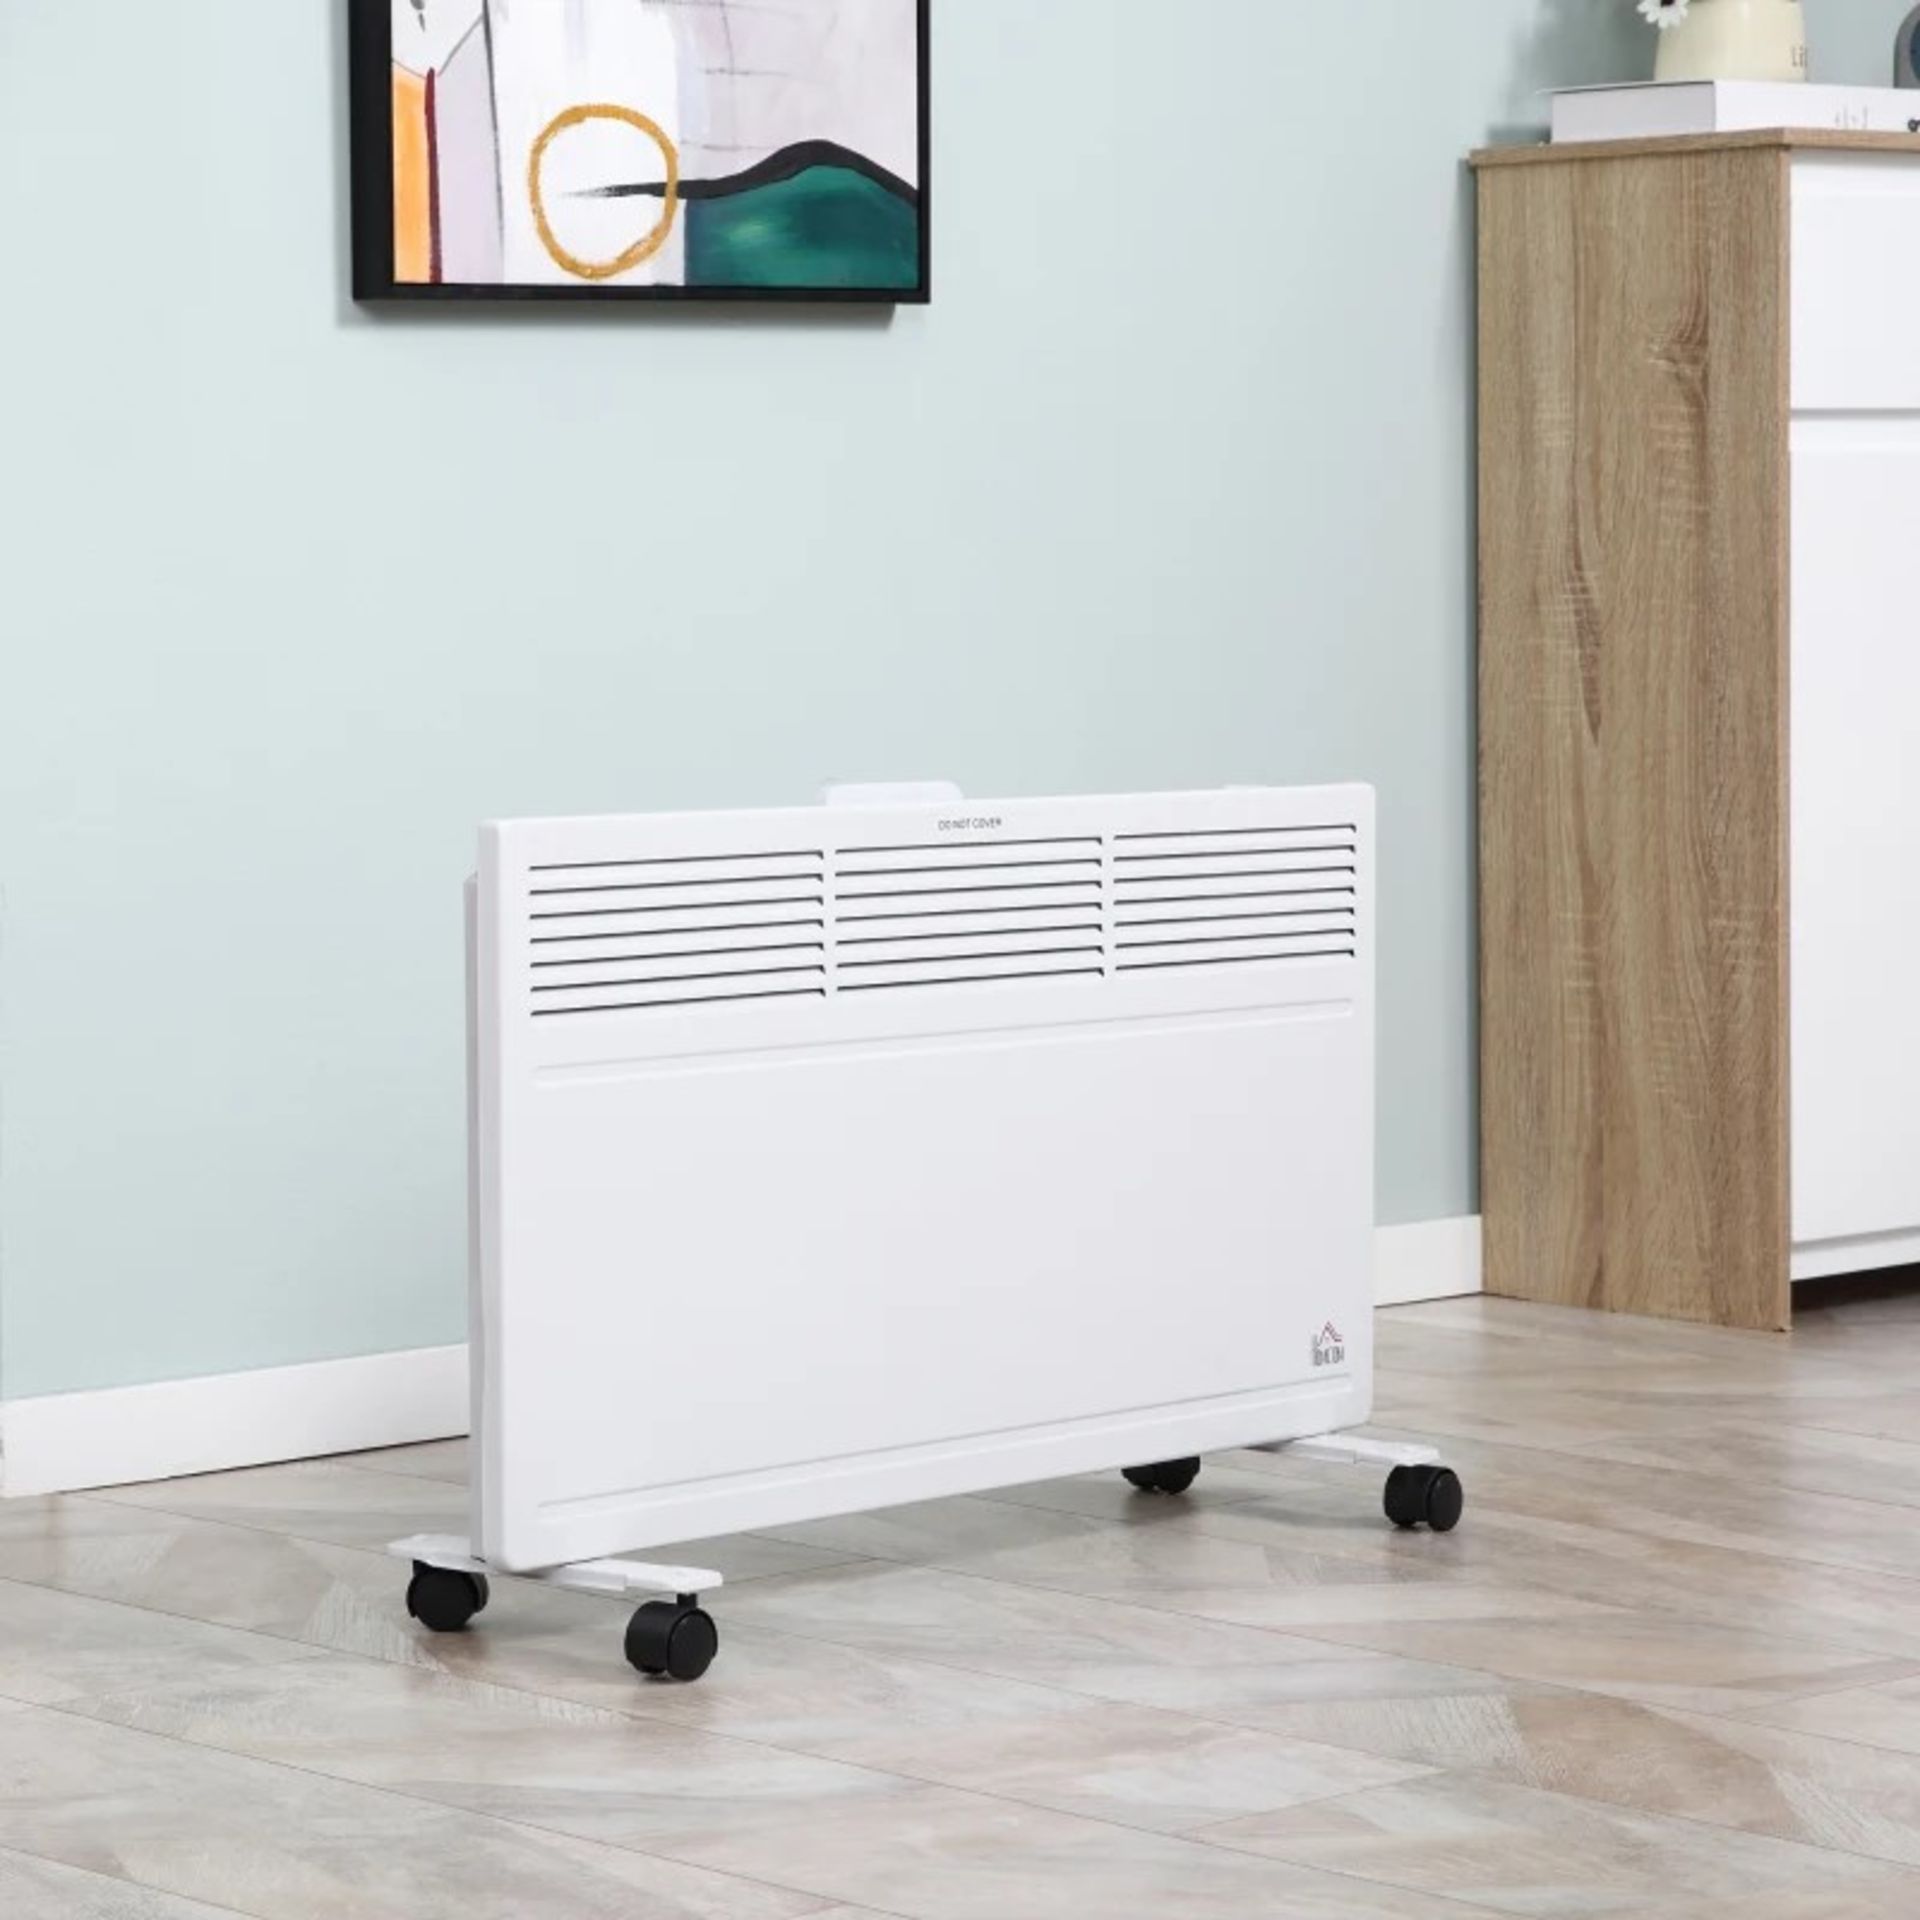 RRP £69.99 - Convector Radiator Heater Freestanding or Wall-mounted w/ Adjustable Thermostat -